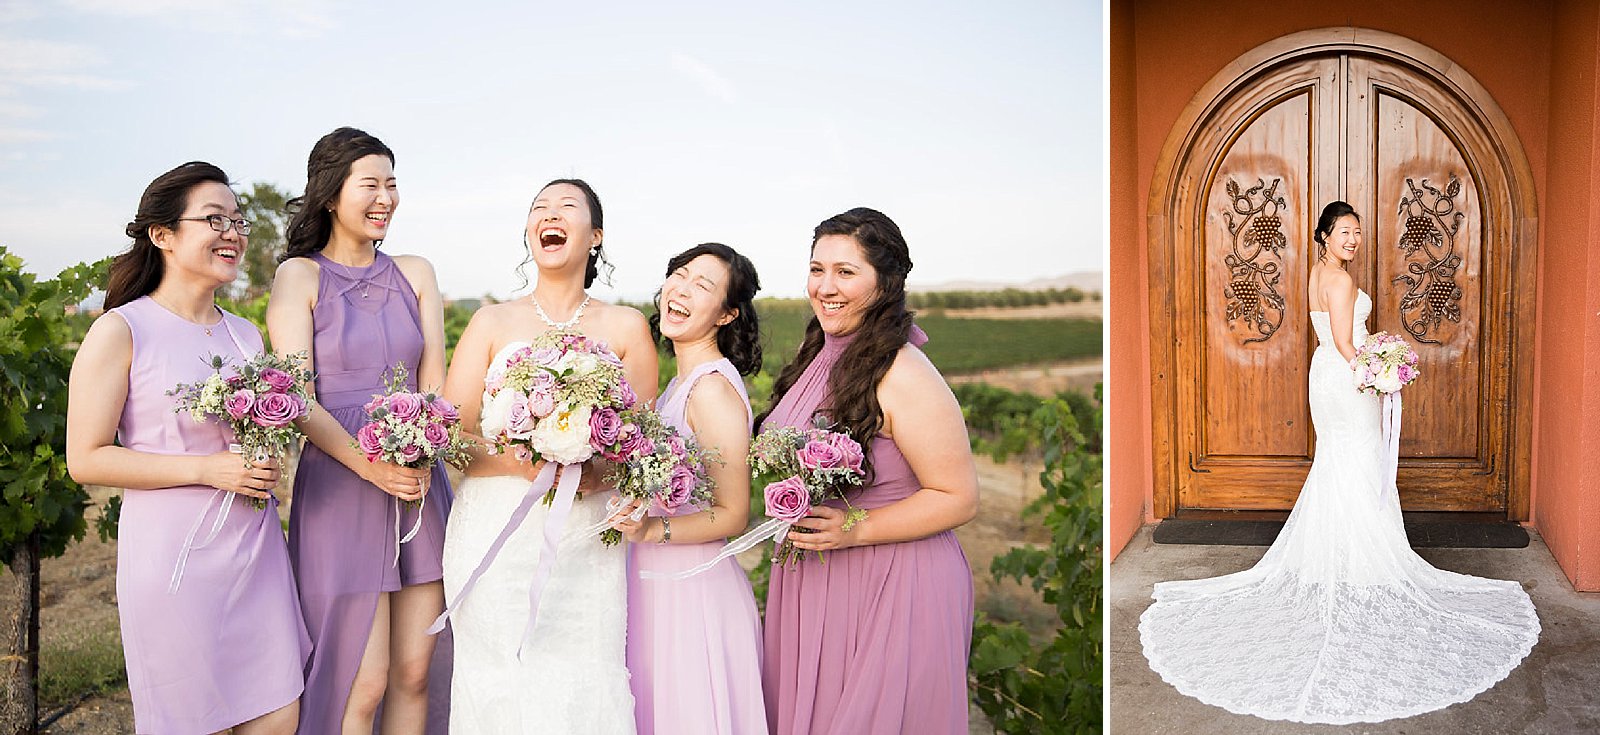 bride with bridesmaids before Falkner Winery wedding day photographed by Randi Michelle Photography